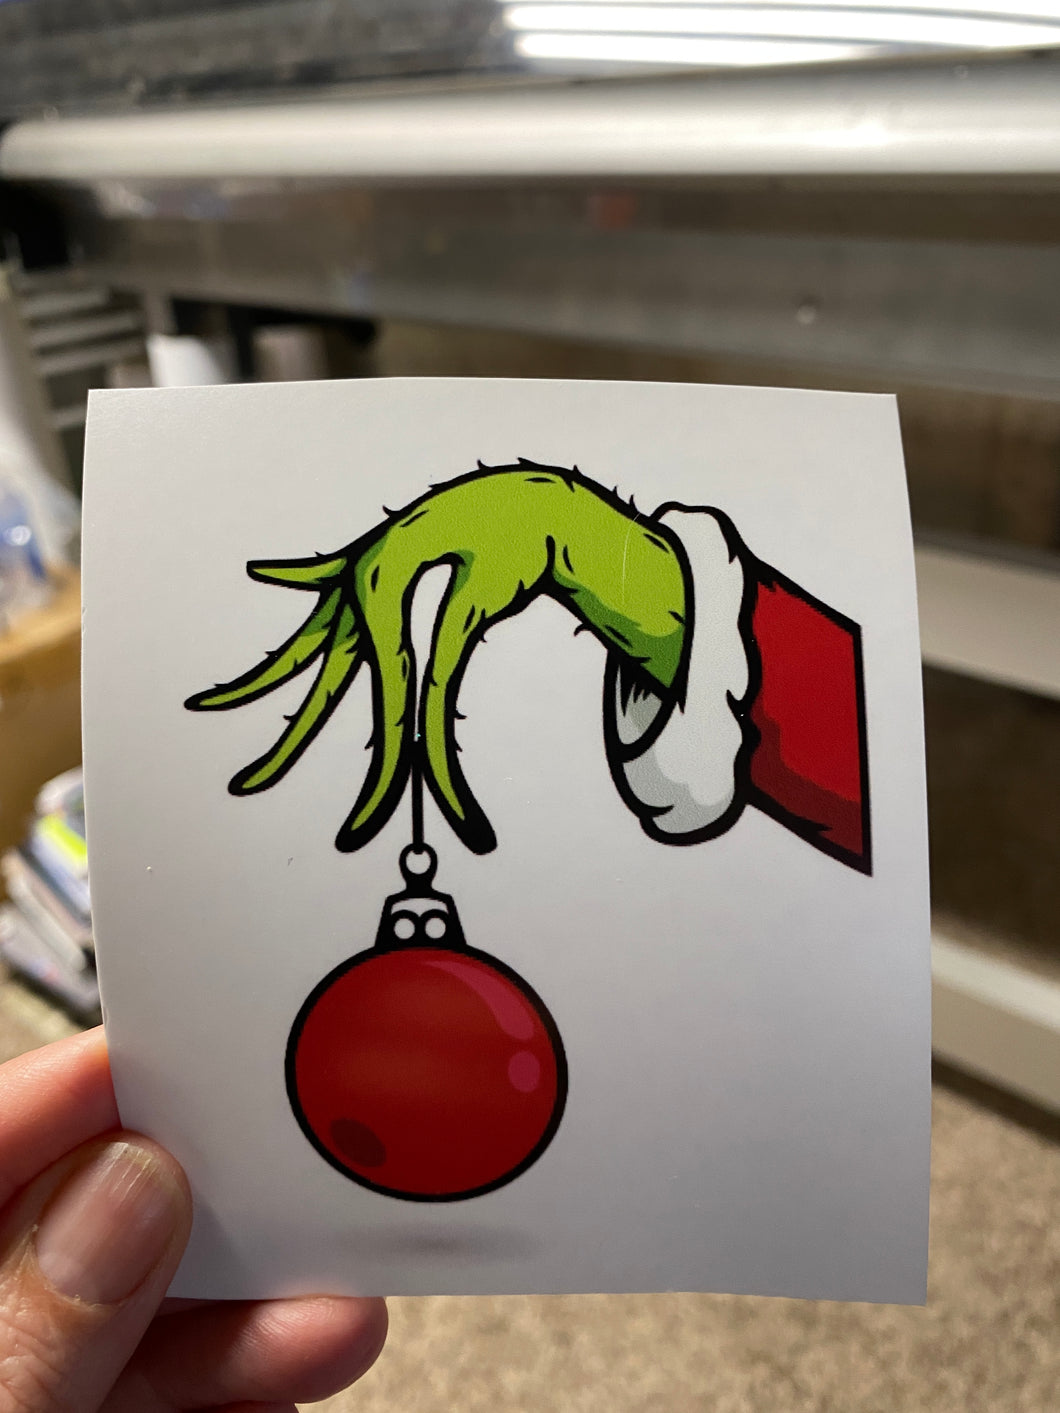 Waterslide Decal Hairy Green Grinch Hand holding Ornament